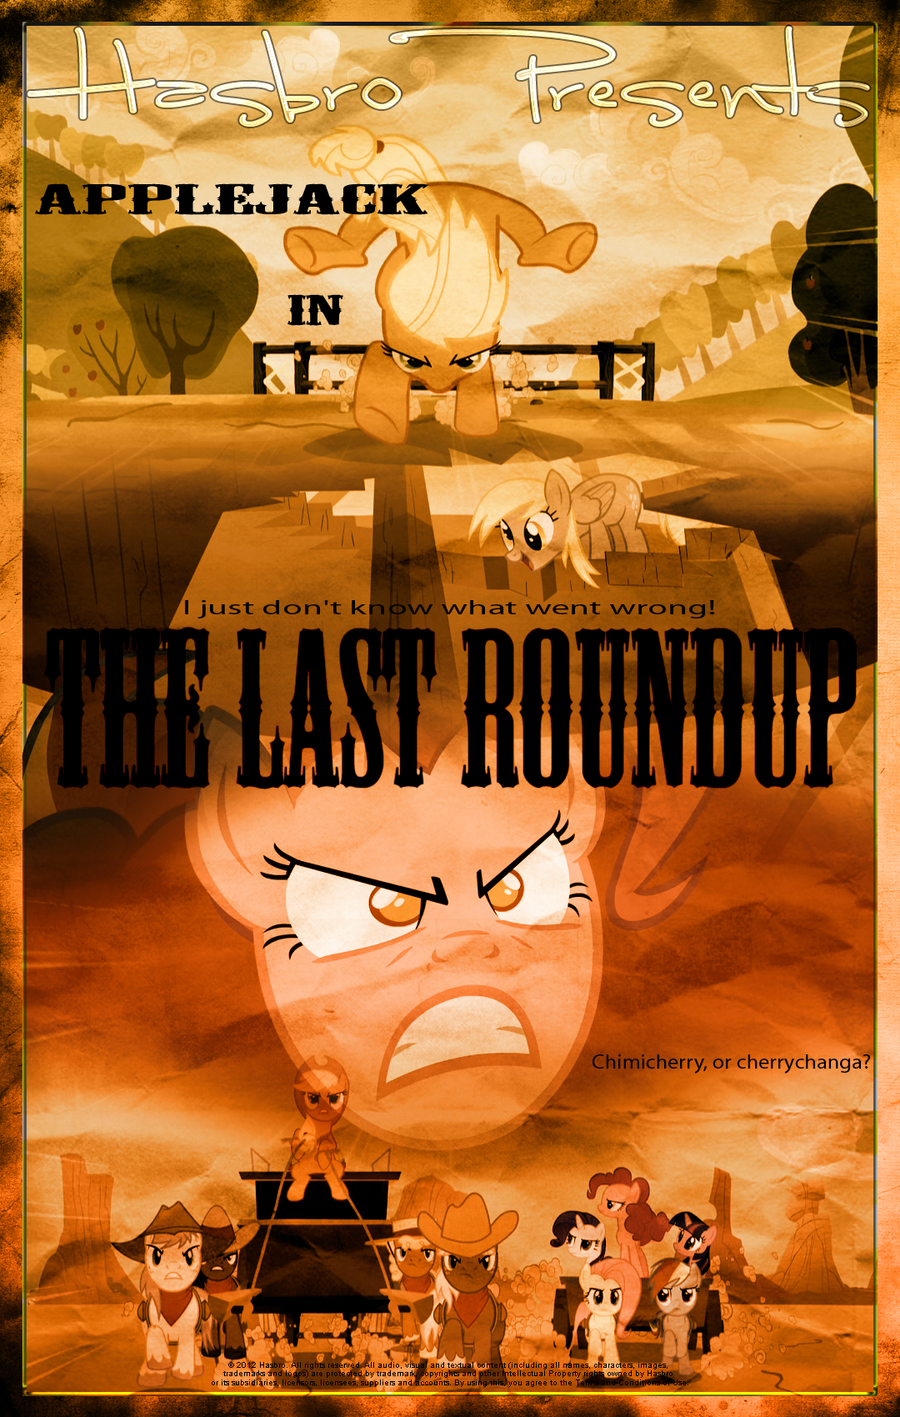 mlp___the_last_roundup___movie_poster_by_pims1978-d53lw9e.png